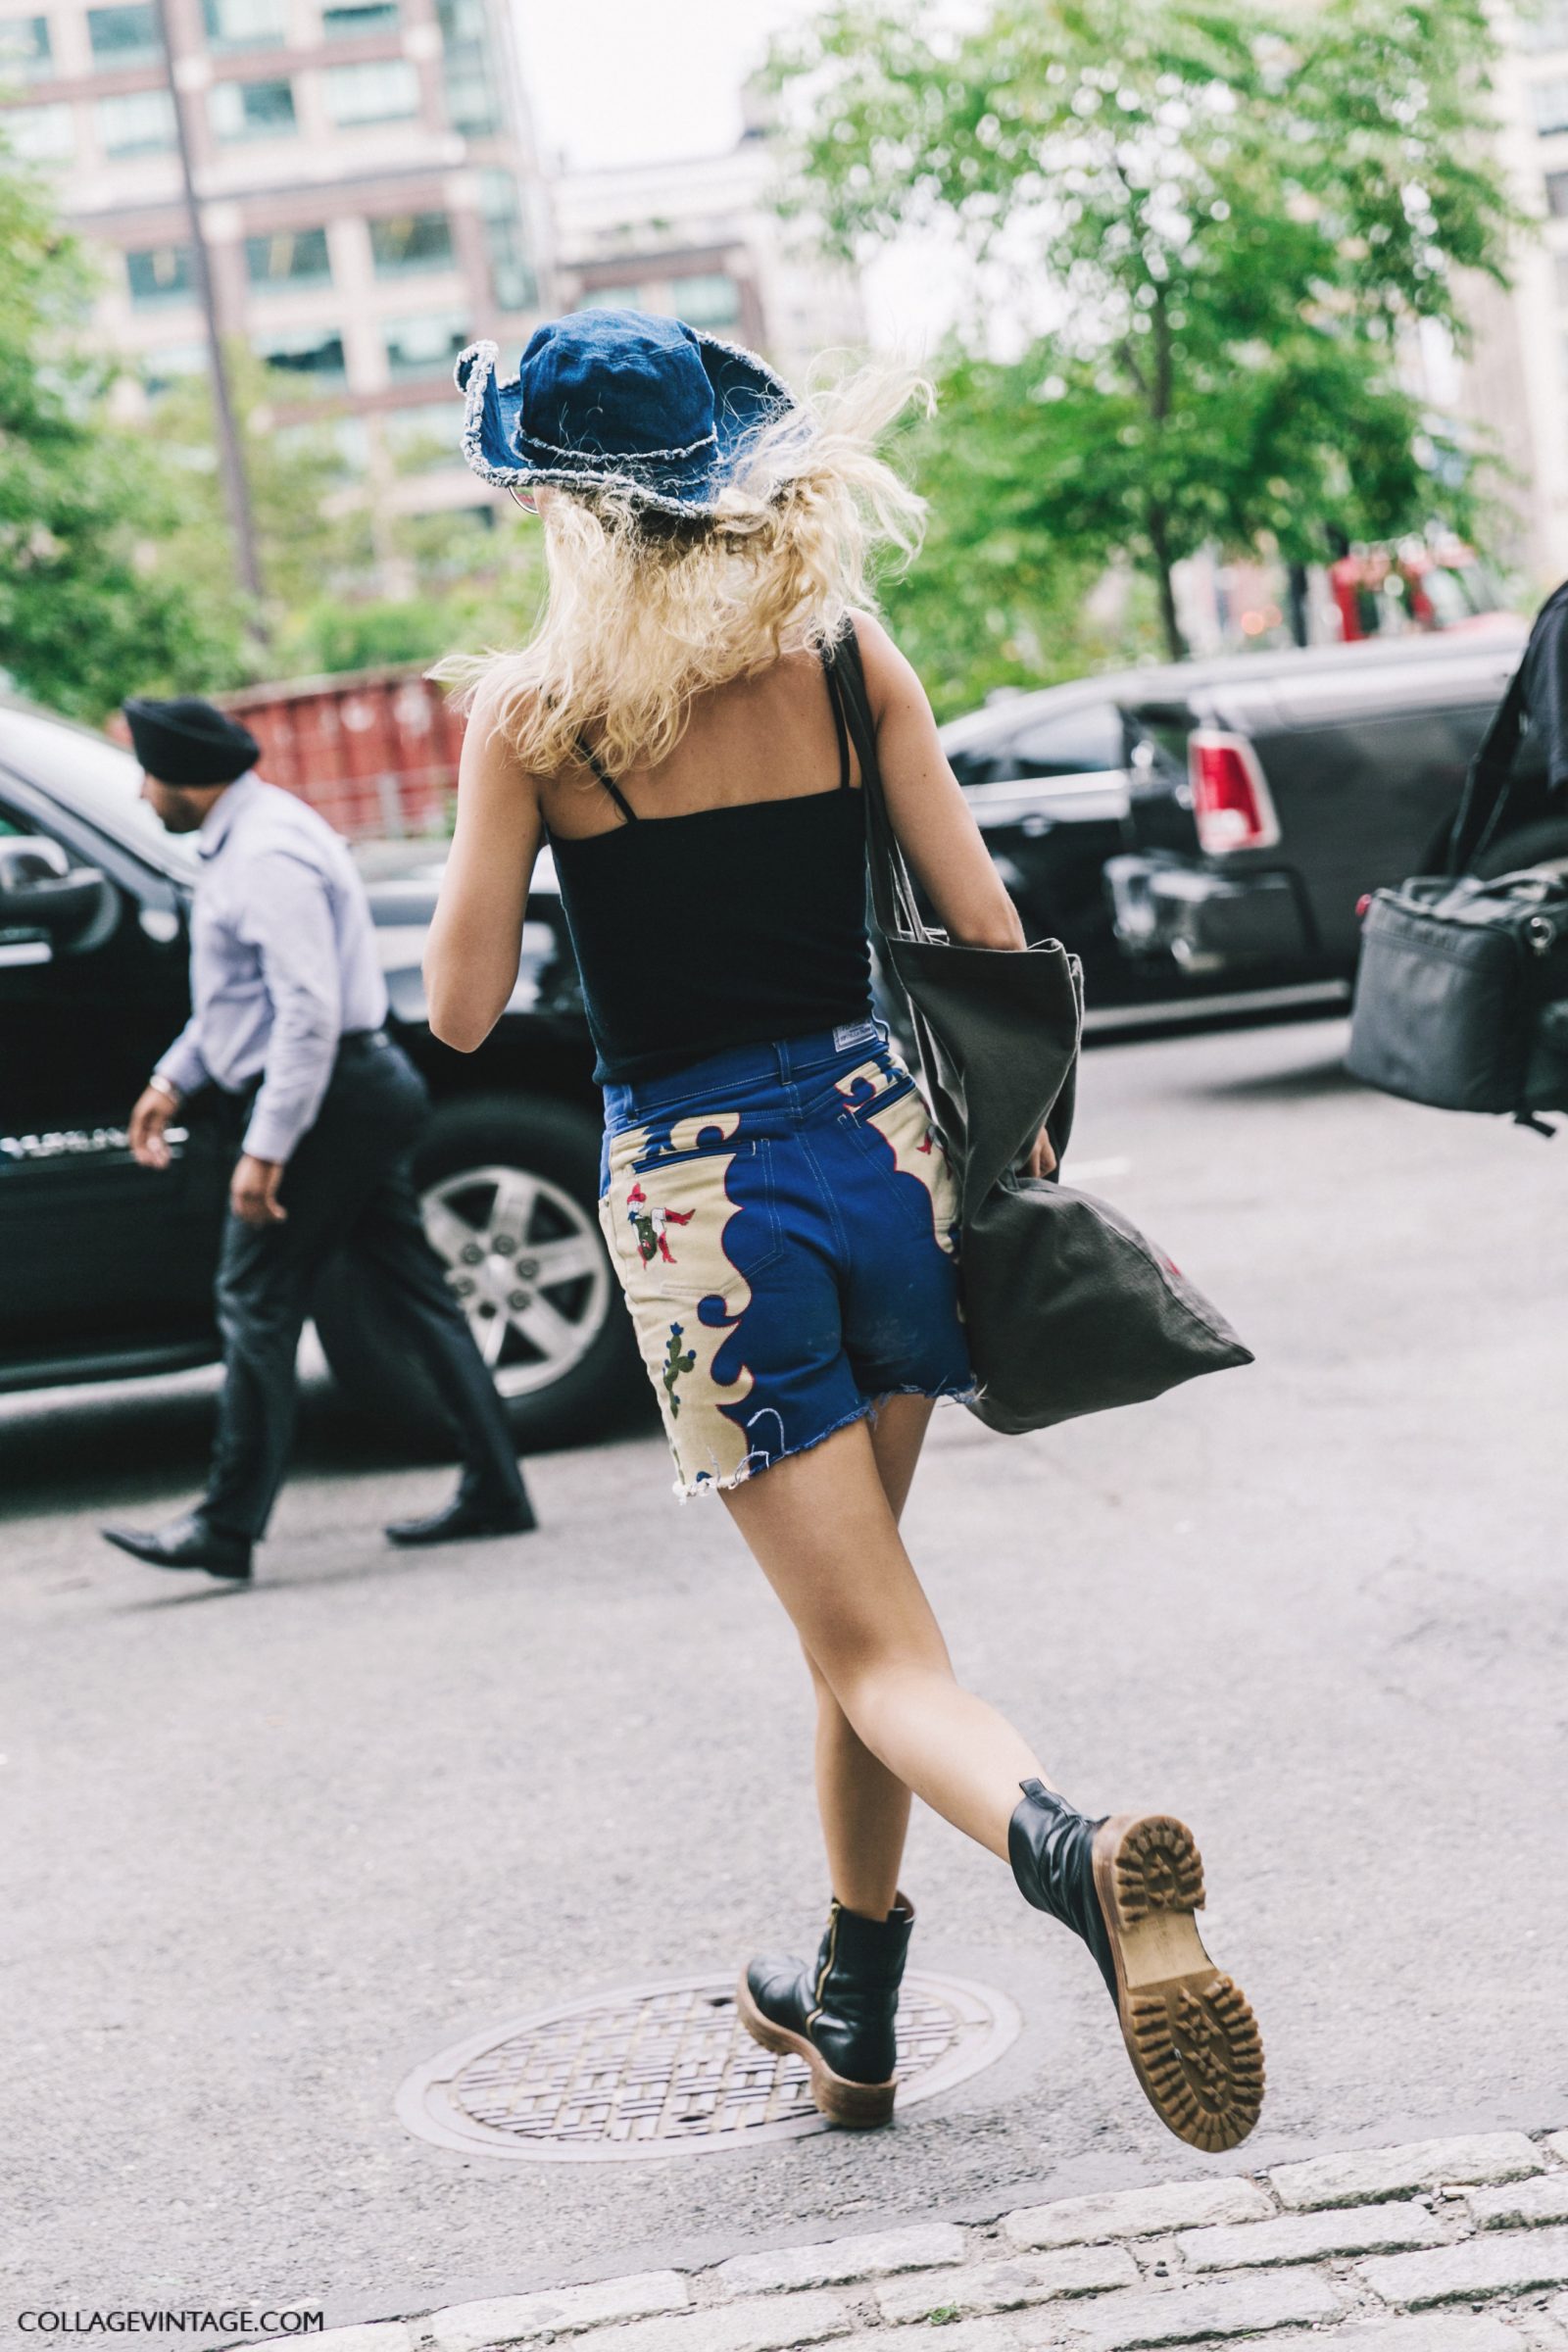 nyfw-new_york_fashion_week_ss17-street_style-outfits-collage_vintage-frederik_sophie-1